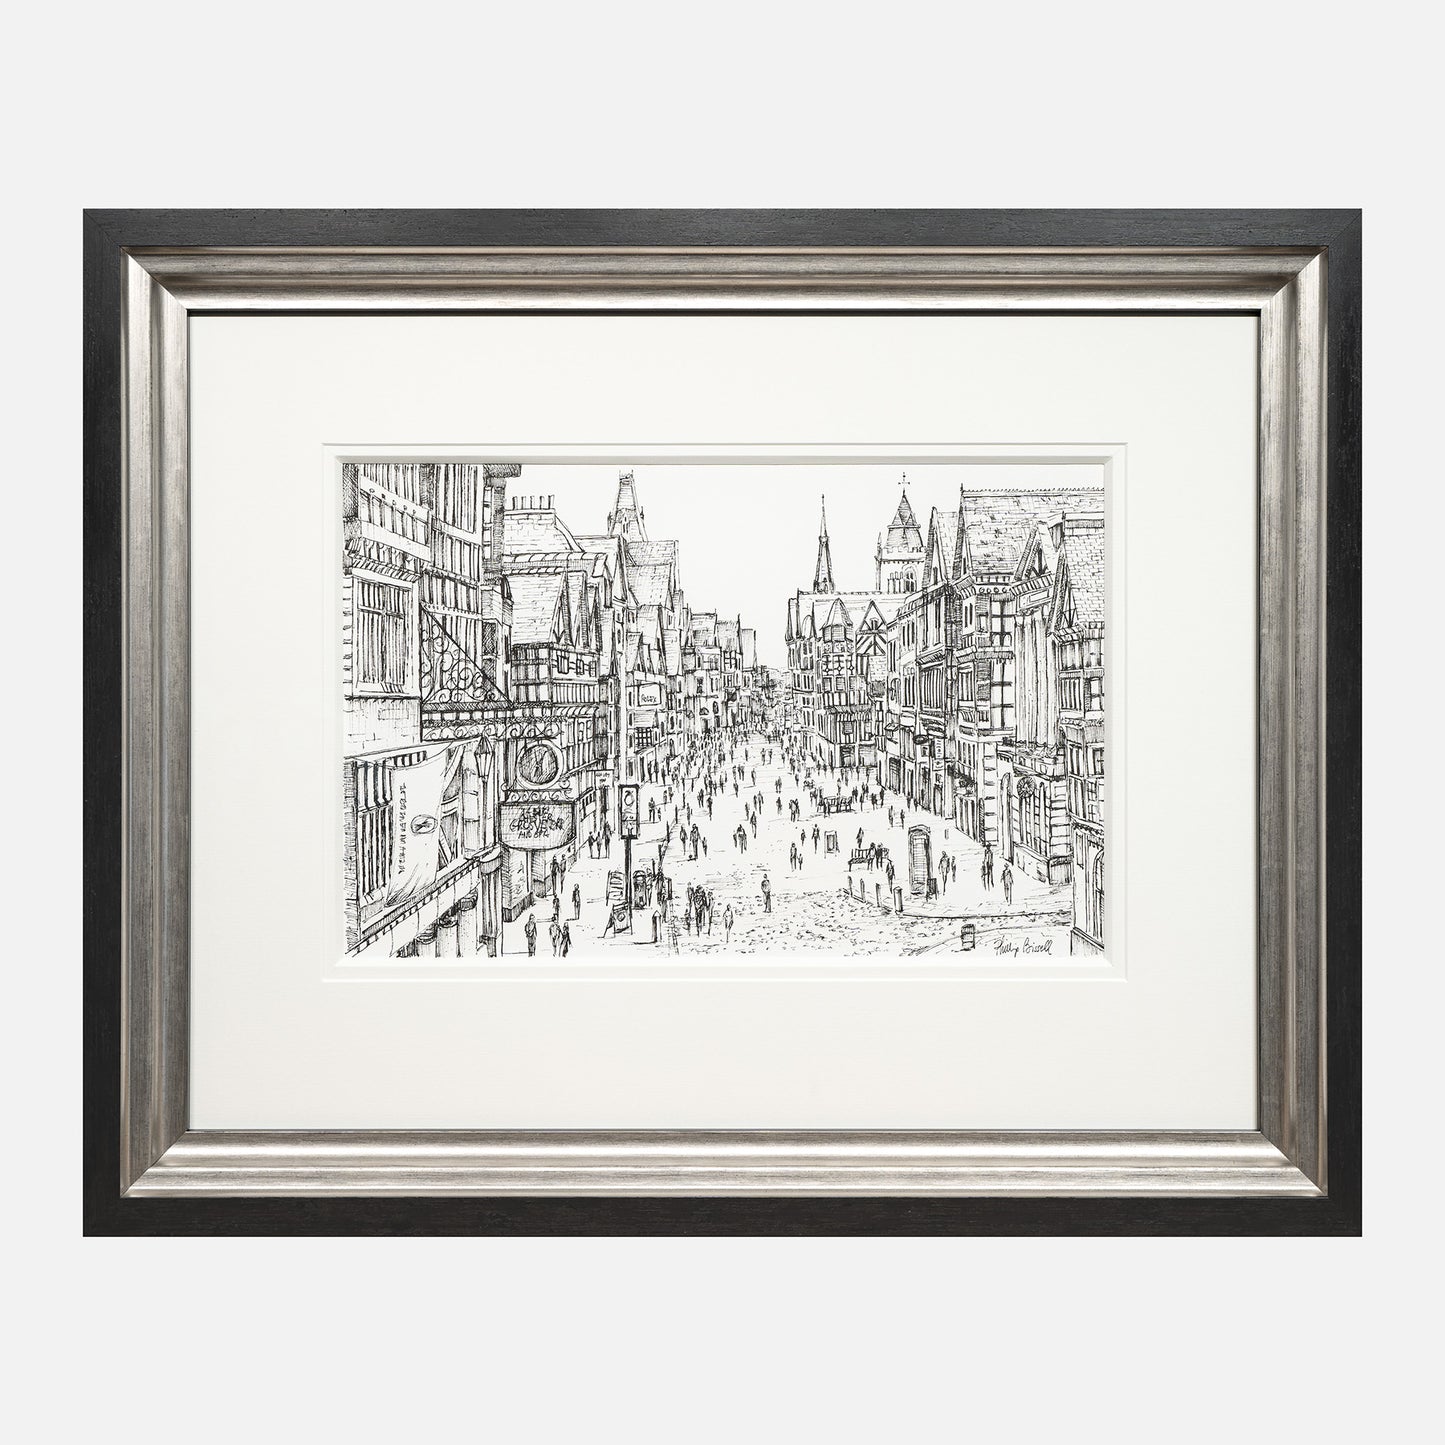 Chester Sketch original sketch by Phillip Bissell in black and silver frame